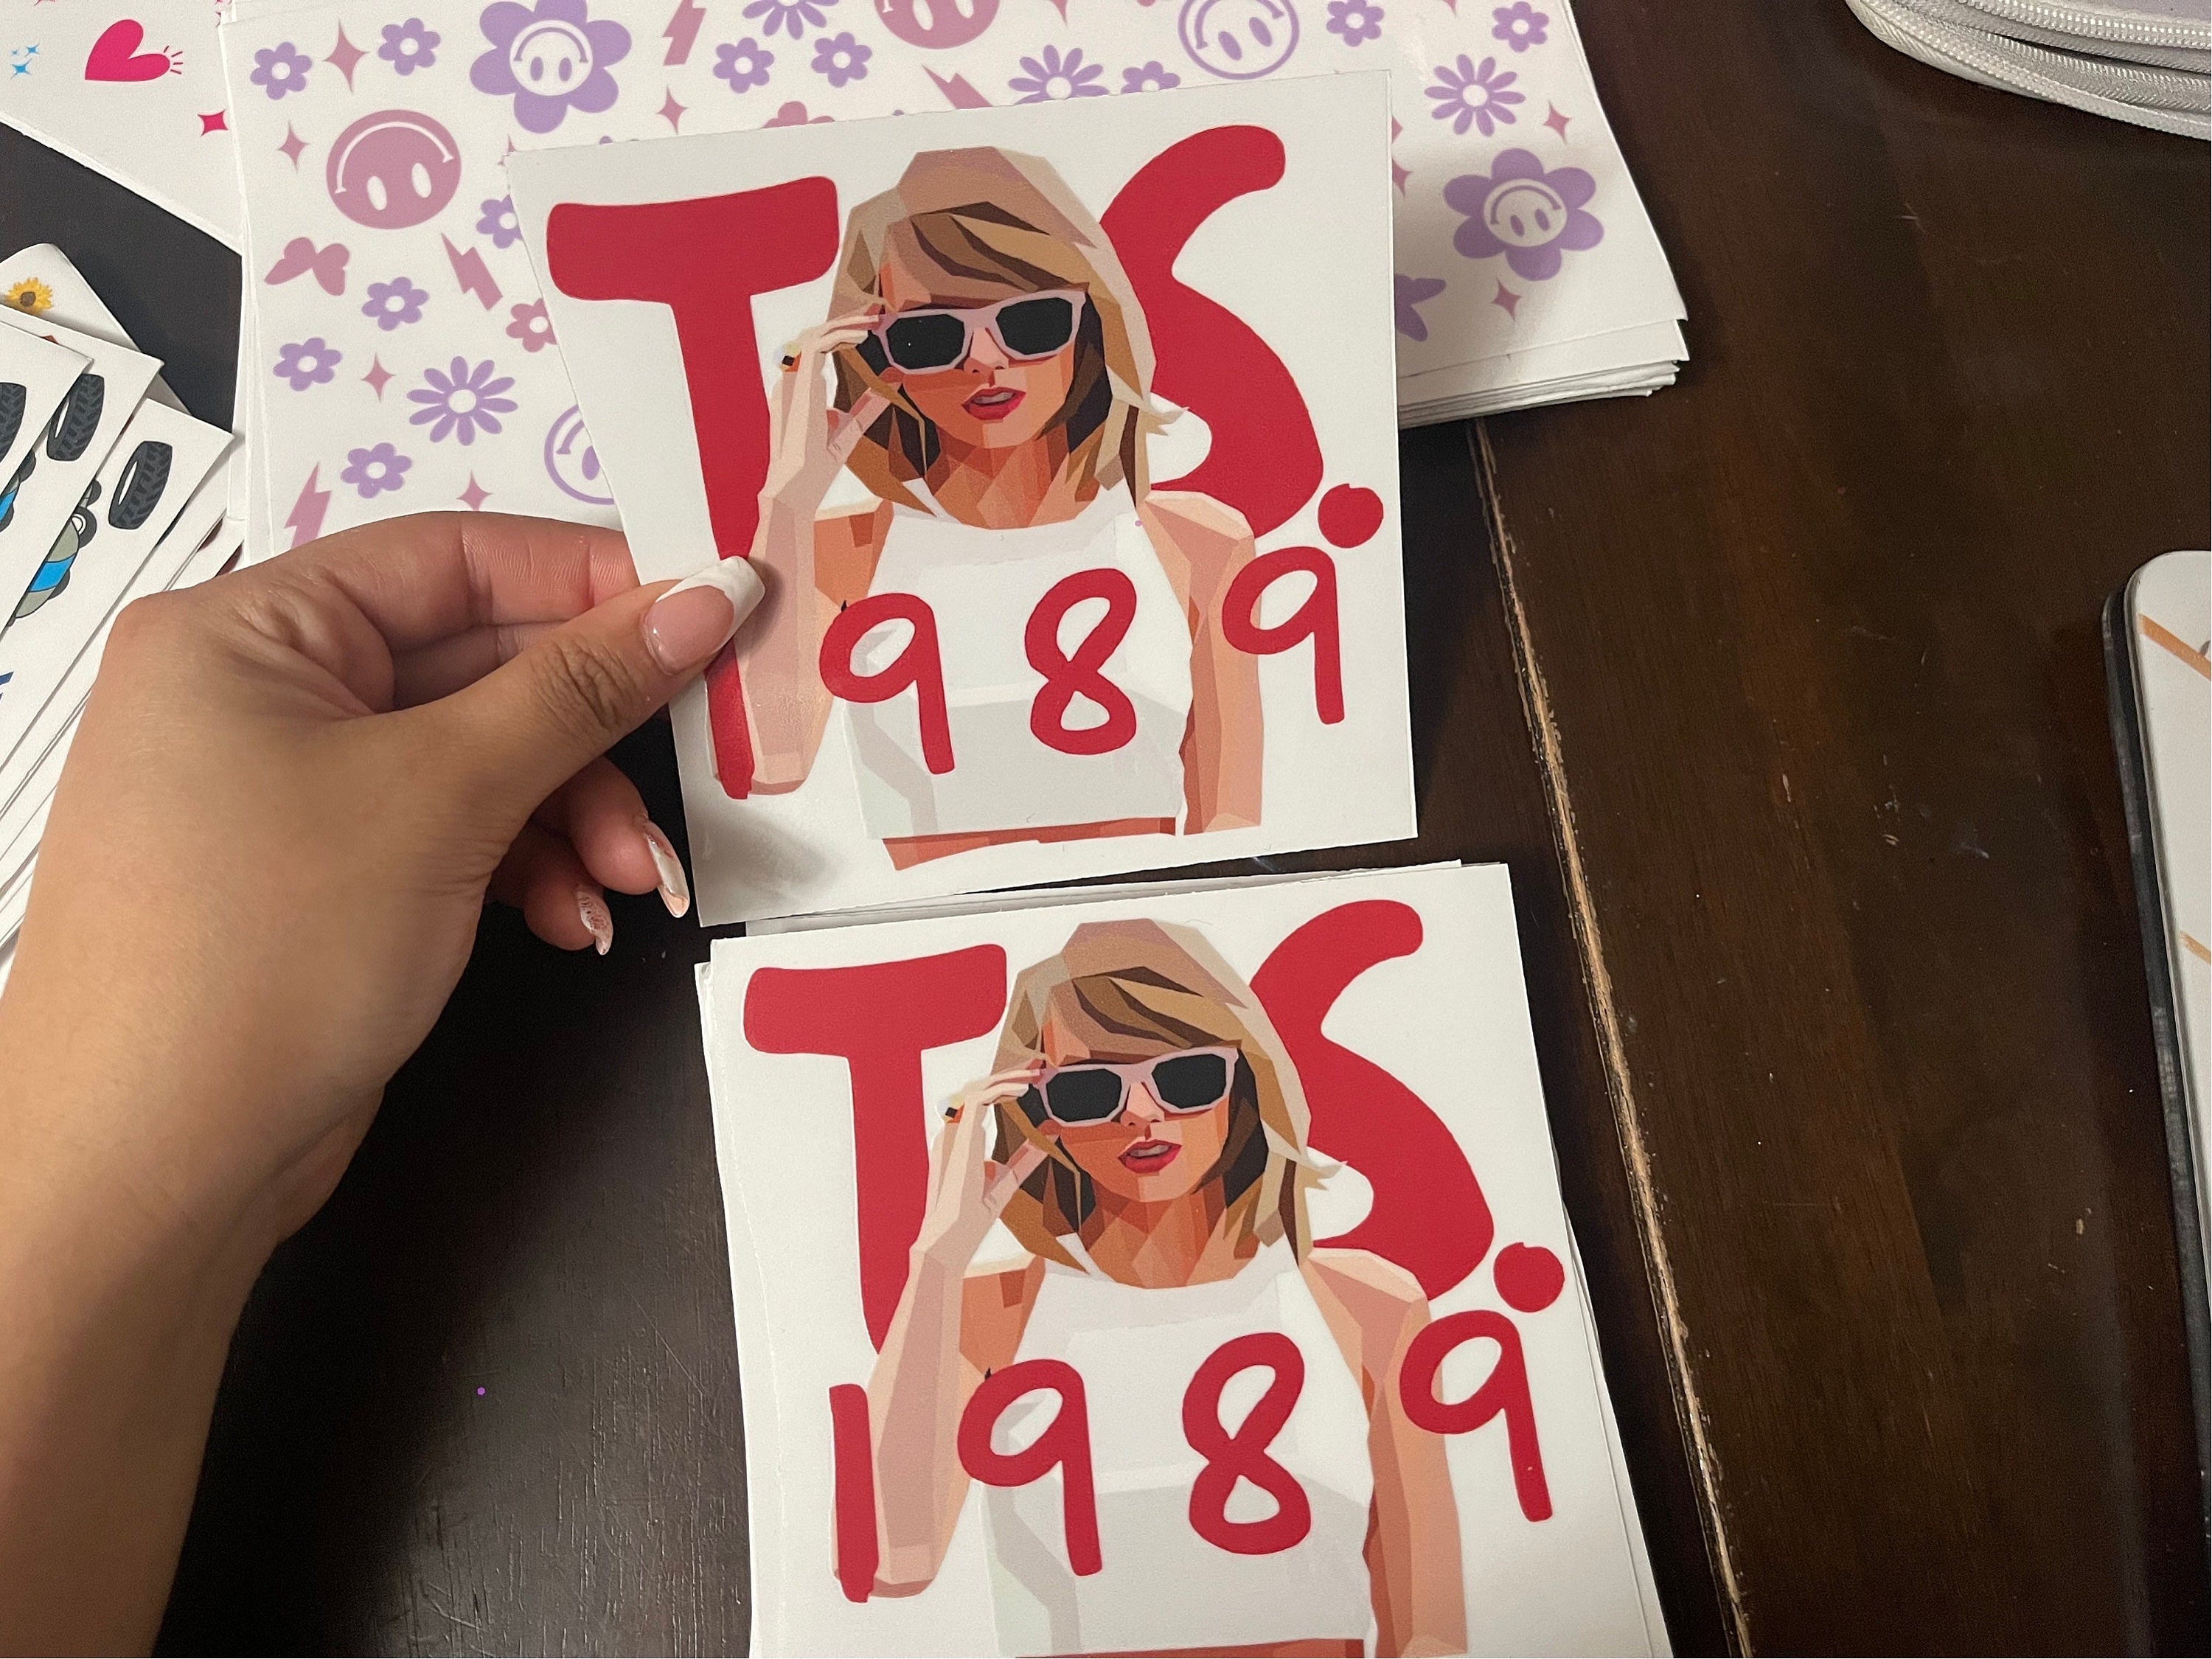 🩵 This exclusive #1989TaylorsVersion UVDTF cup wrap and straw topper